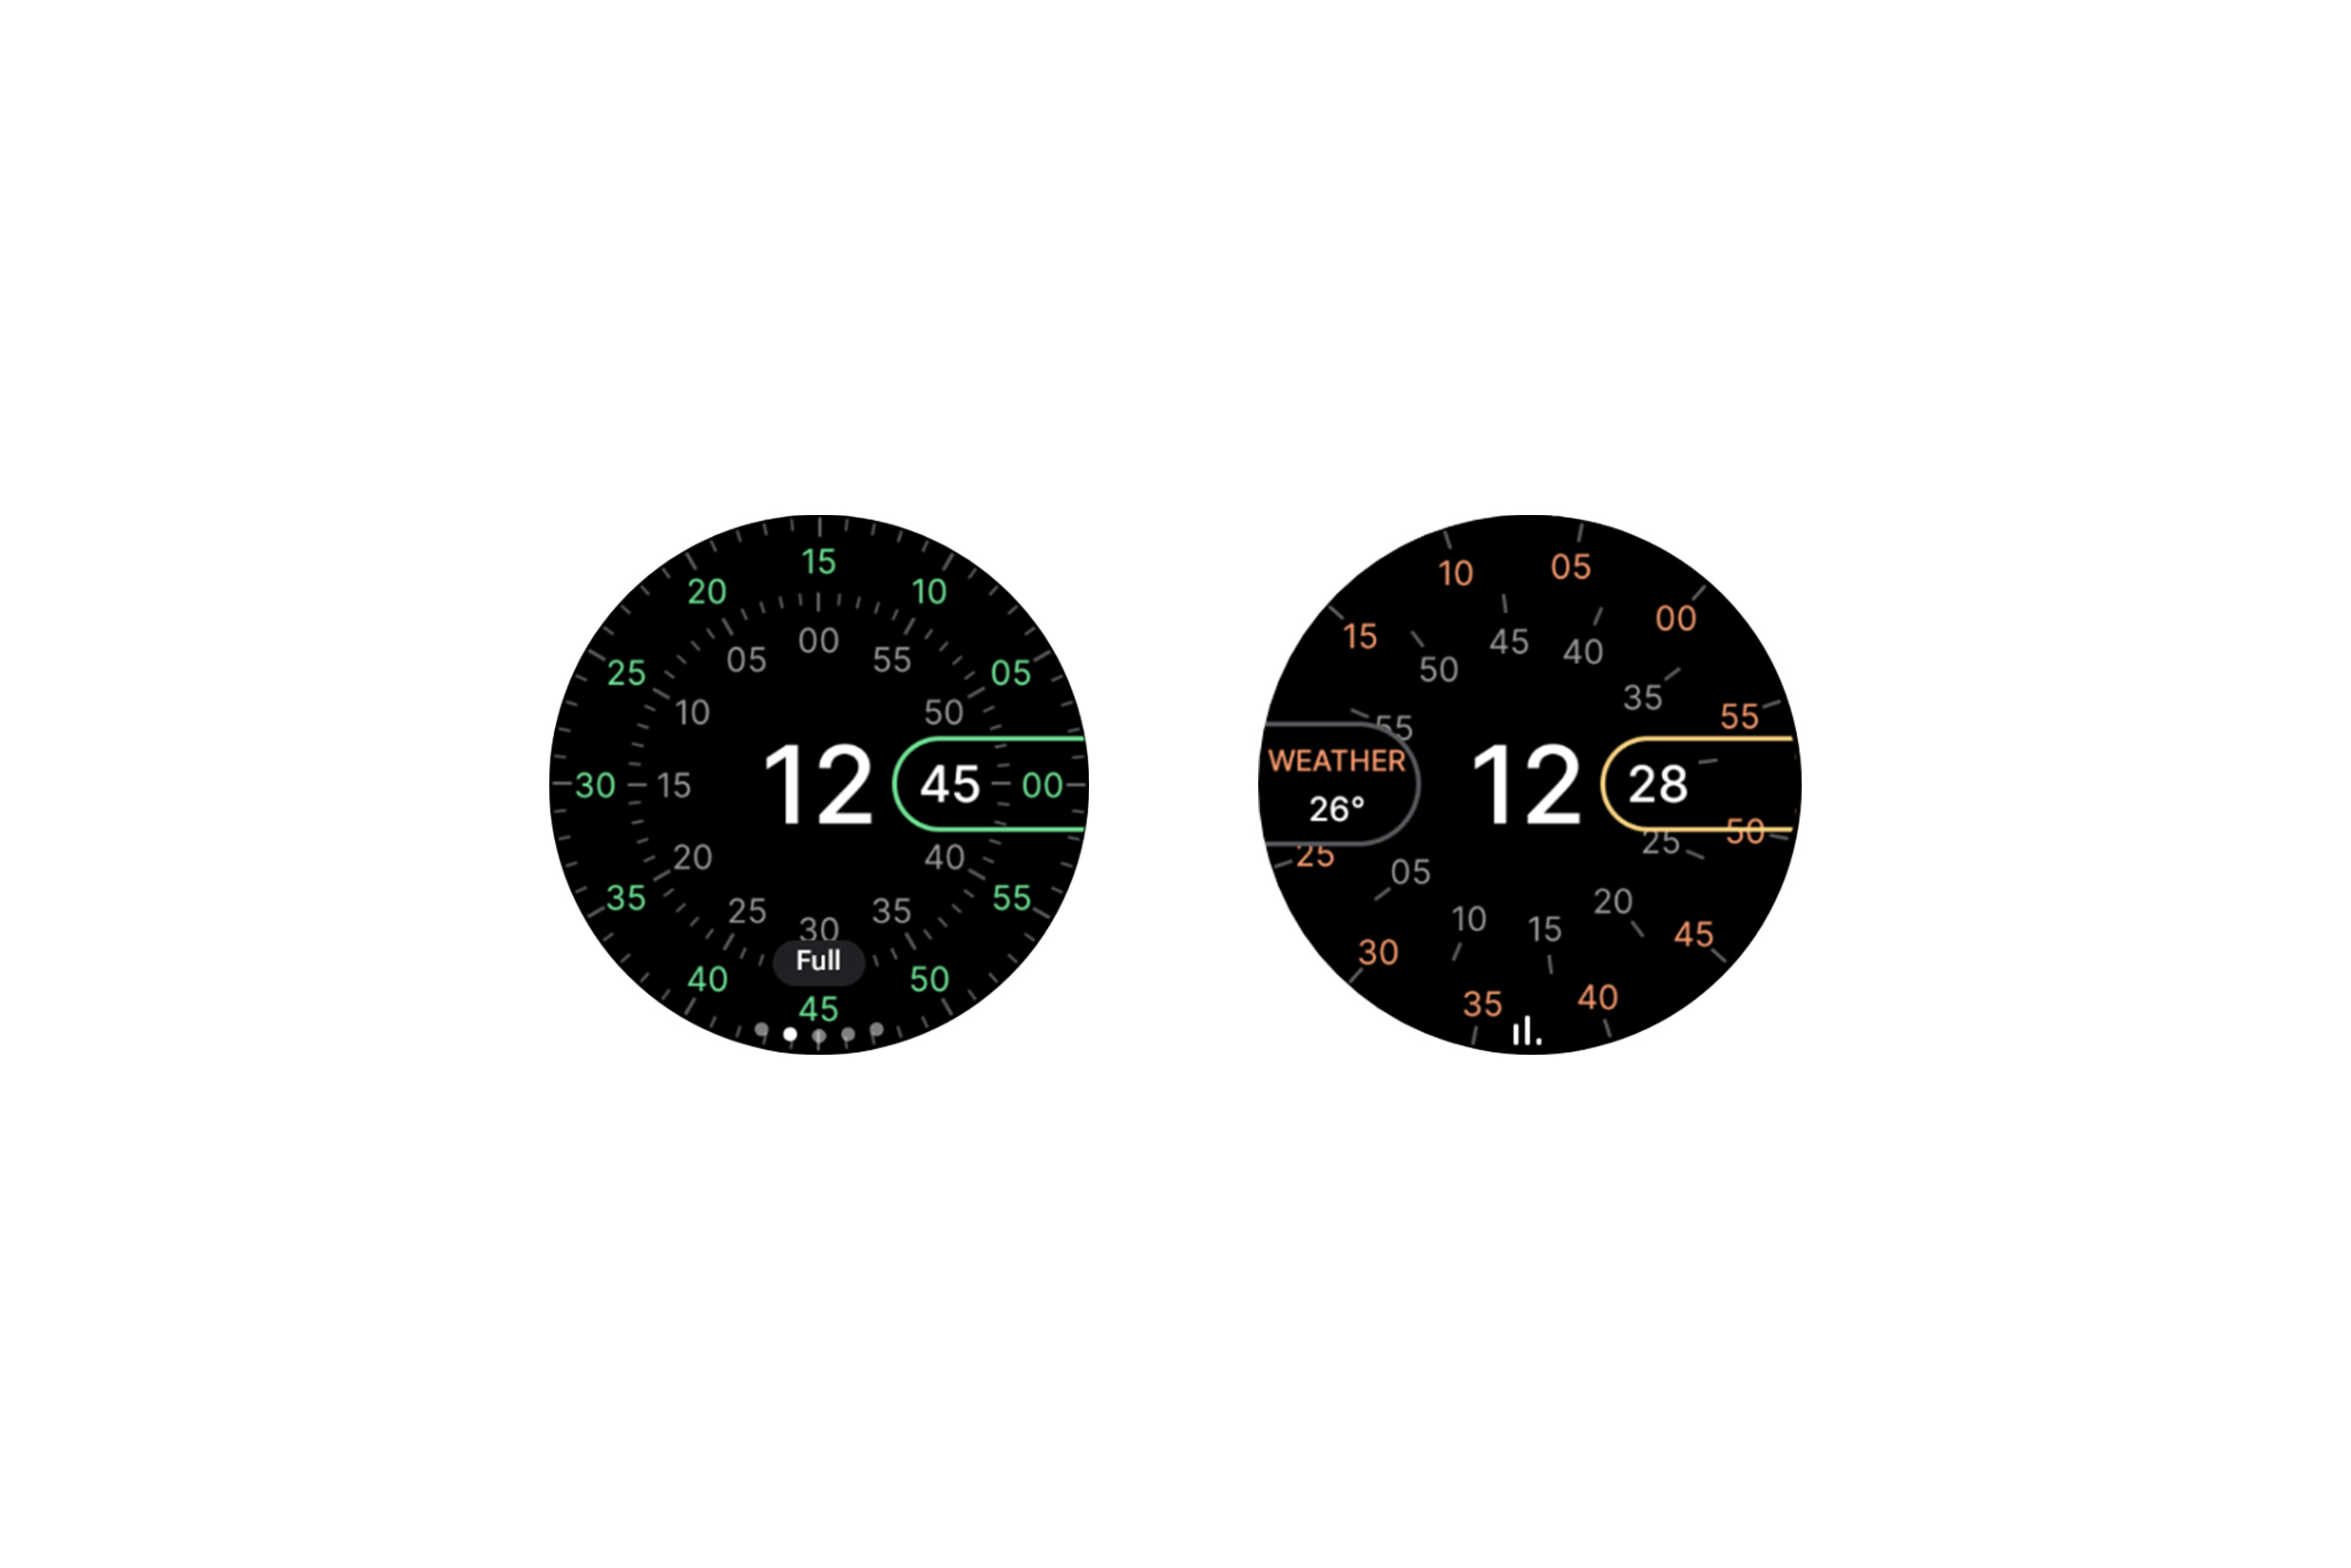 Concentric Wear OS watch face for Samsung Galaxy Watch.